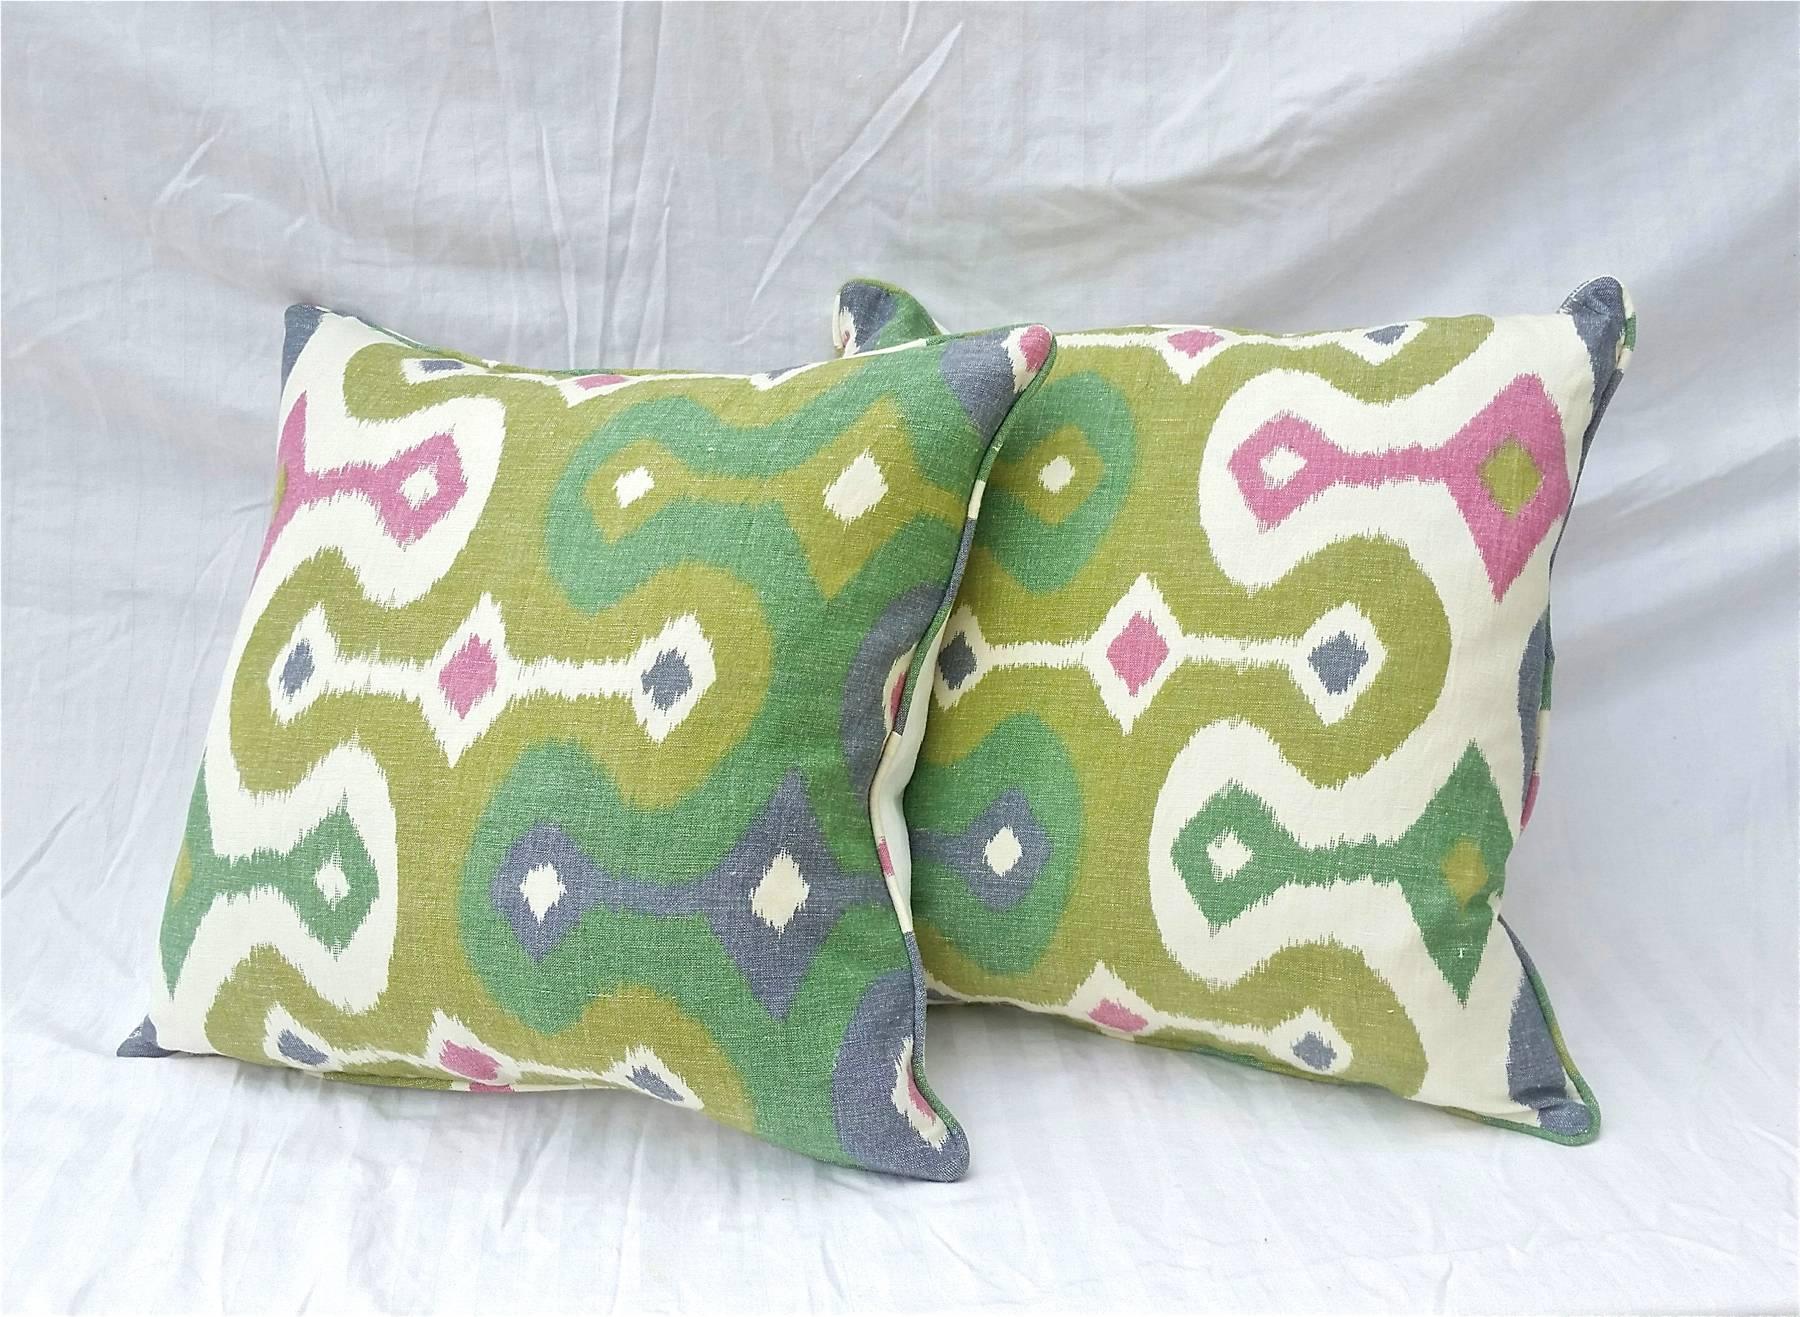 Pair of down throw pillows in Schumacher "Darya" Ikat linen fabric. Down inserts are 80% down/20% synthetic mix. Pillow covers are self corded and come equipped with hidden zippers.